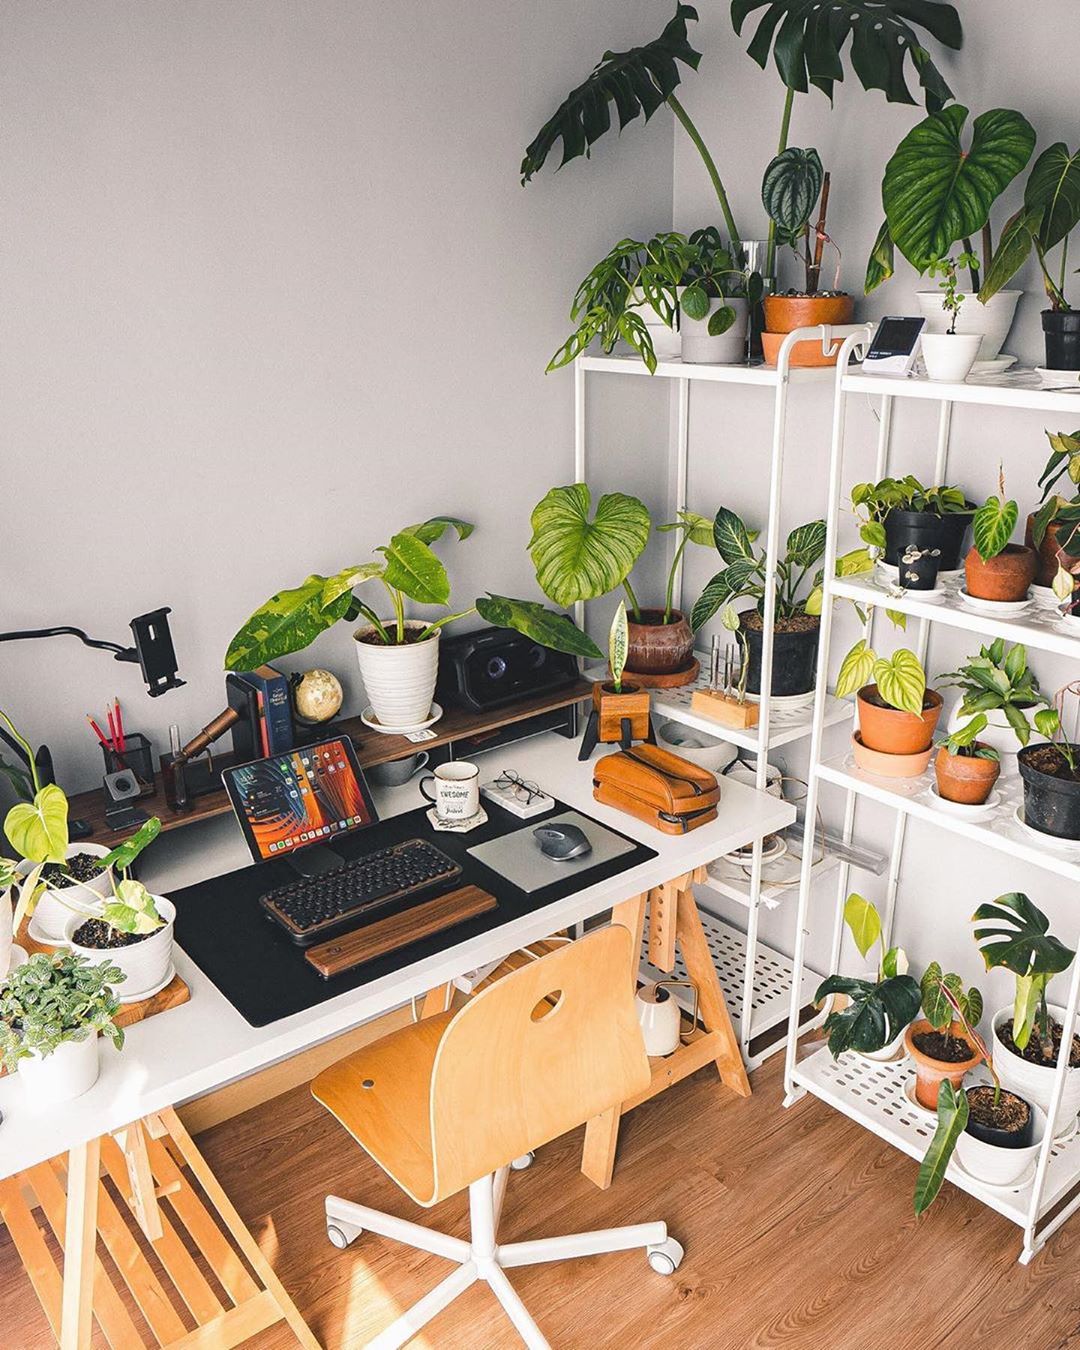 Benefits of Adding Plants To Your Office